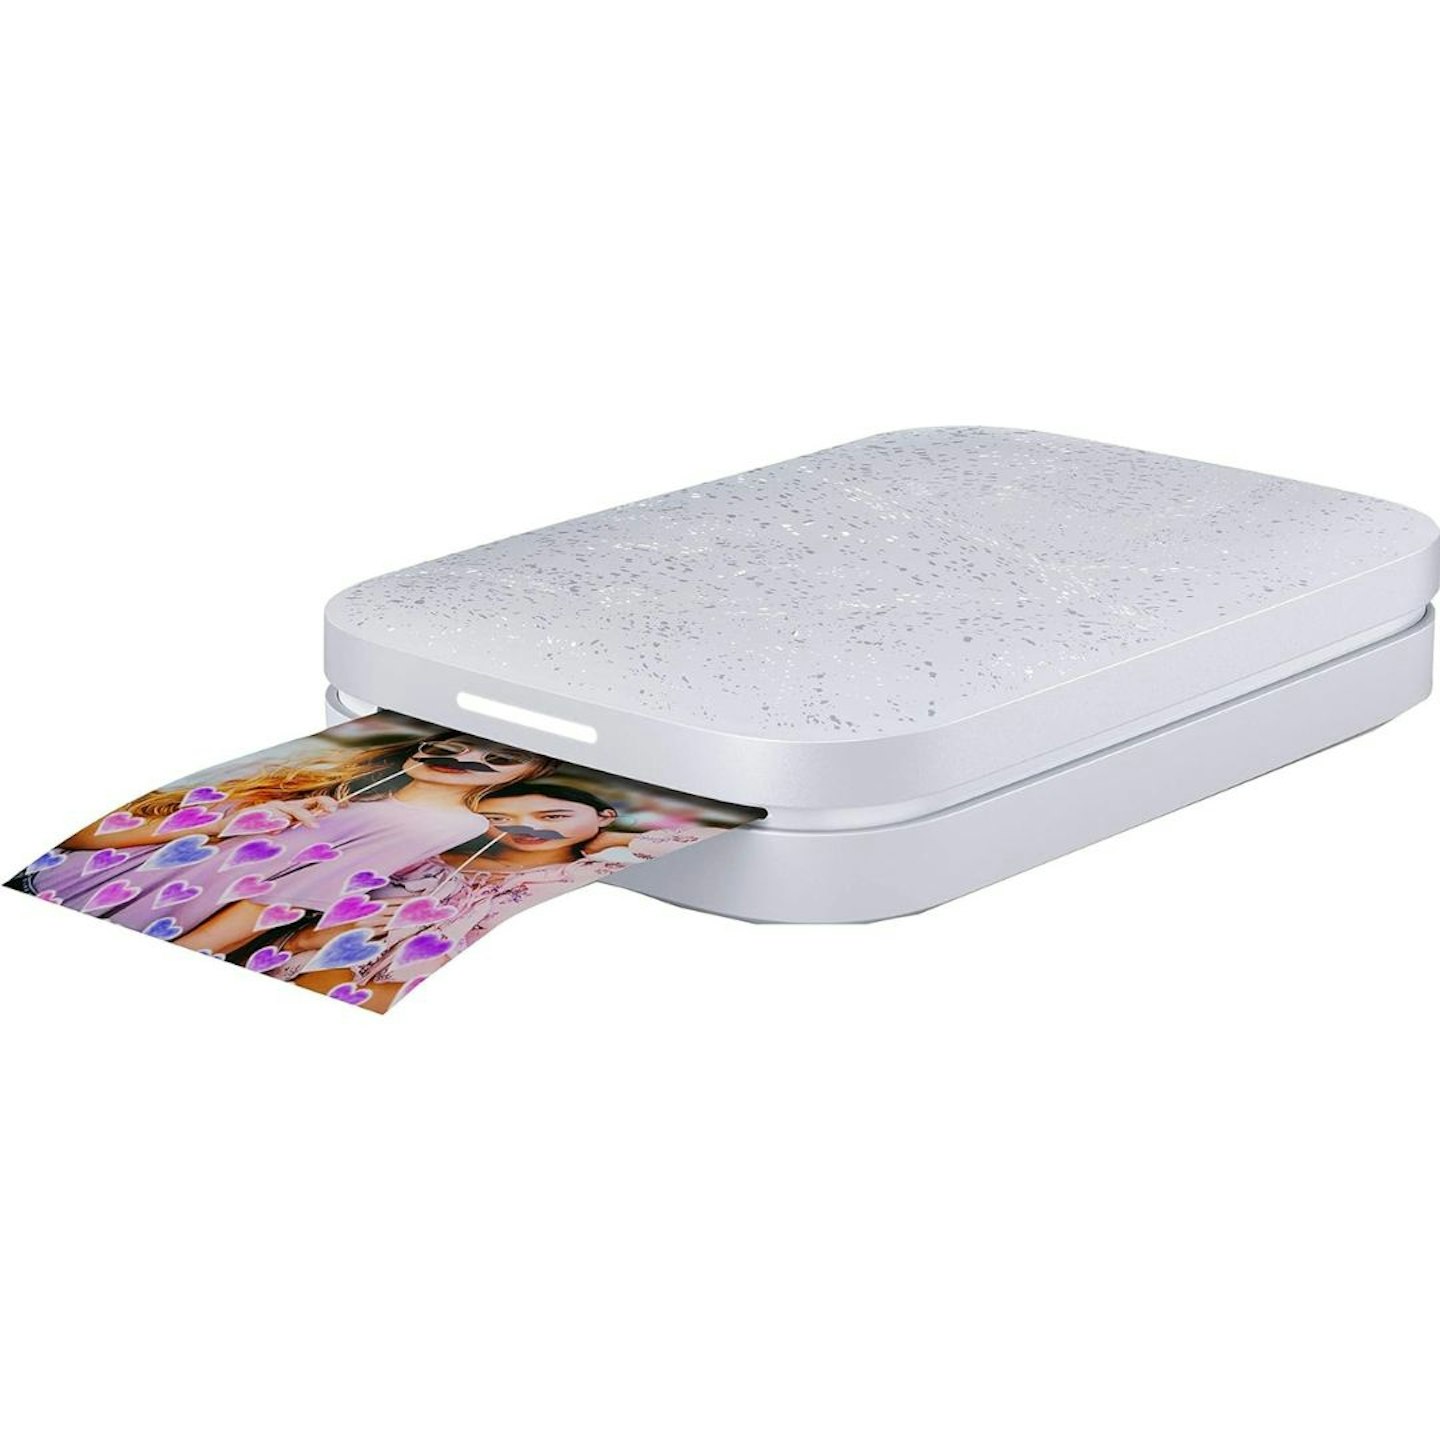 Best Christmas Gifts For Kids: HP HPISPW Sprocket Portable Photo Printer